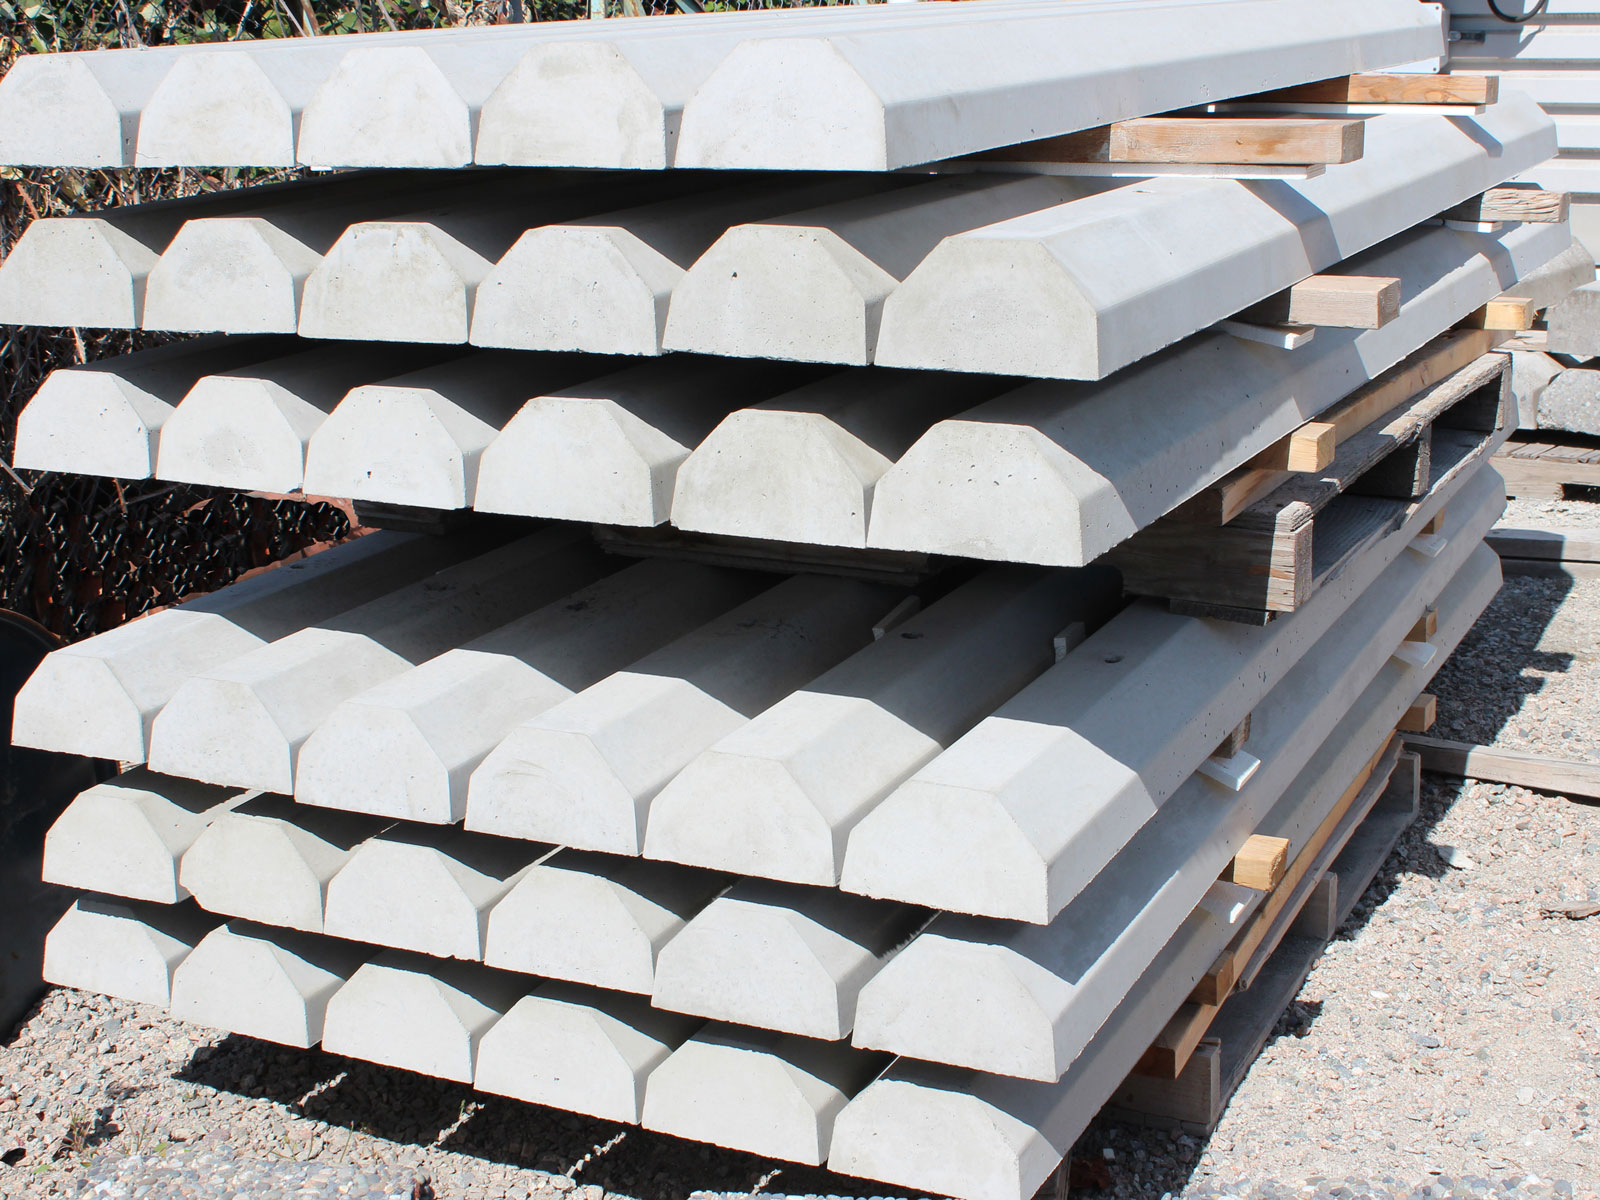 Precast Concrete coverage offered includes parking blocks, building pads, risers, and custom pours.